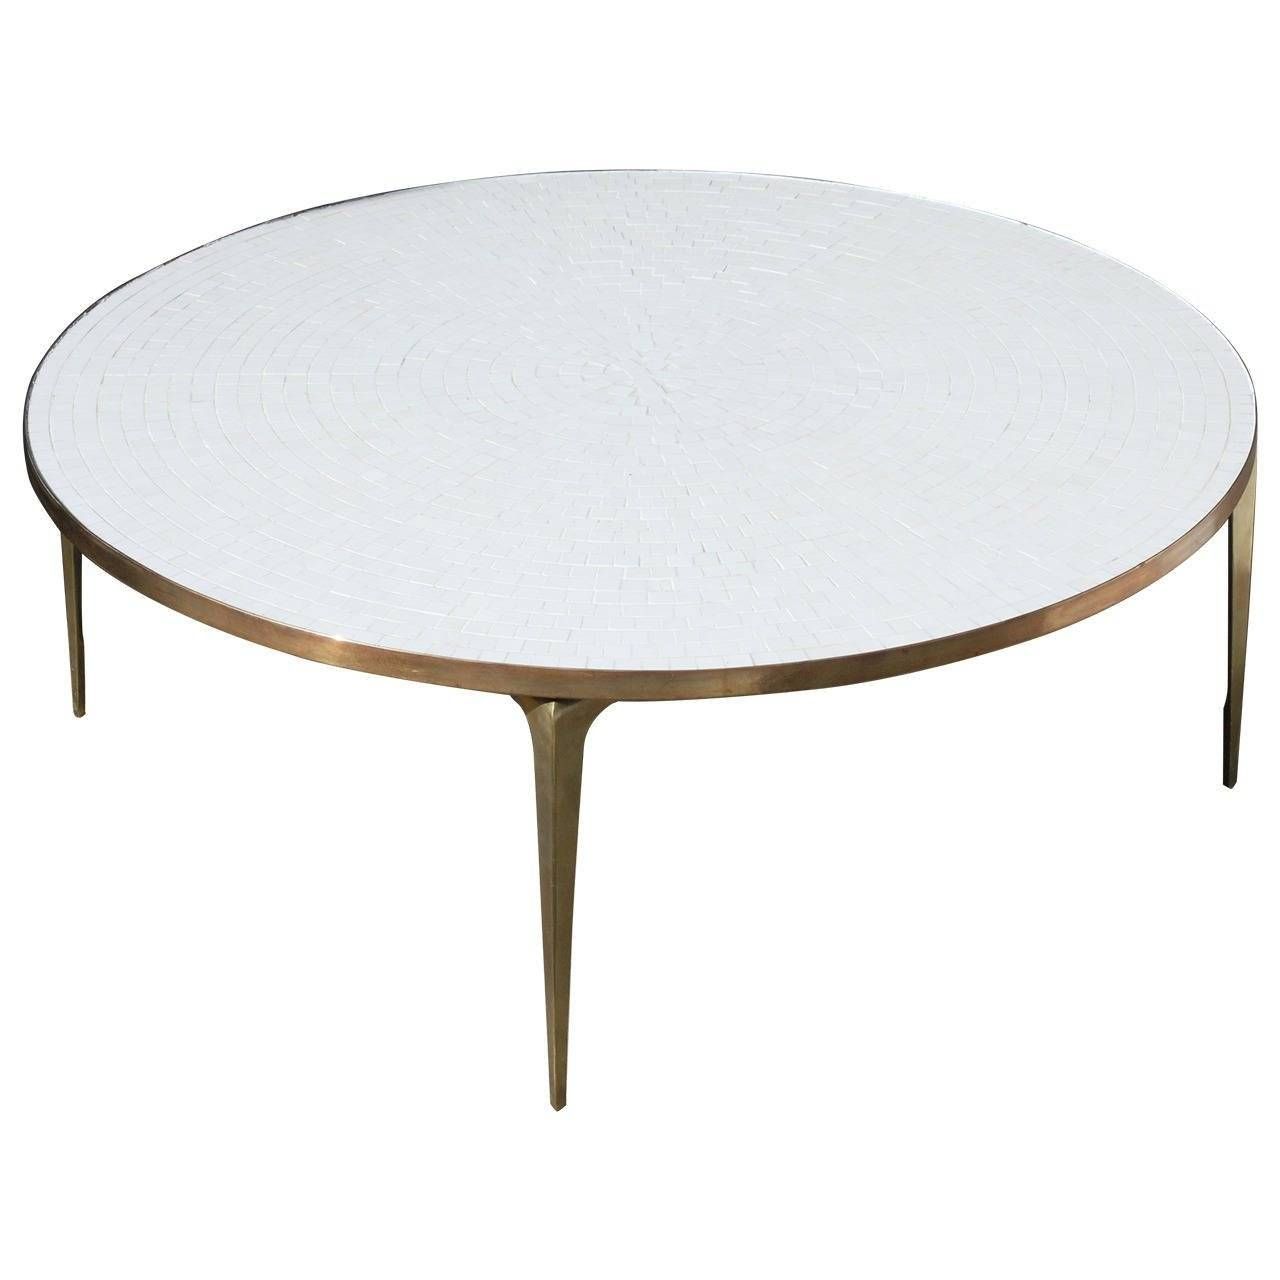 Round Brass And White Mosaic Coffee Table At 1stdibs – Jericho Within White Circle Coffee Tables (View 19 of 30)